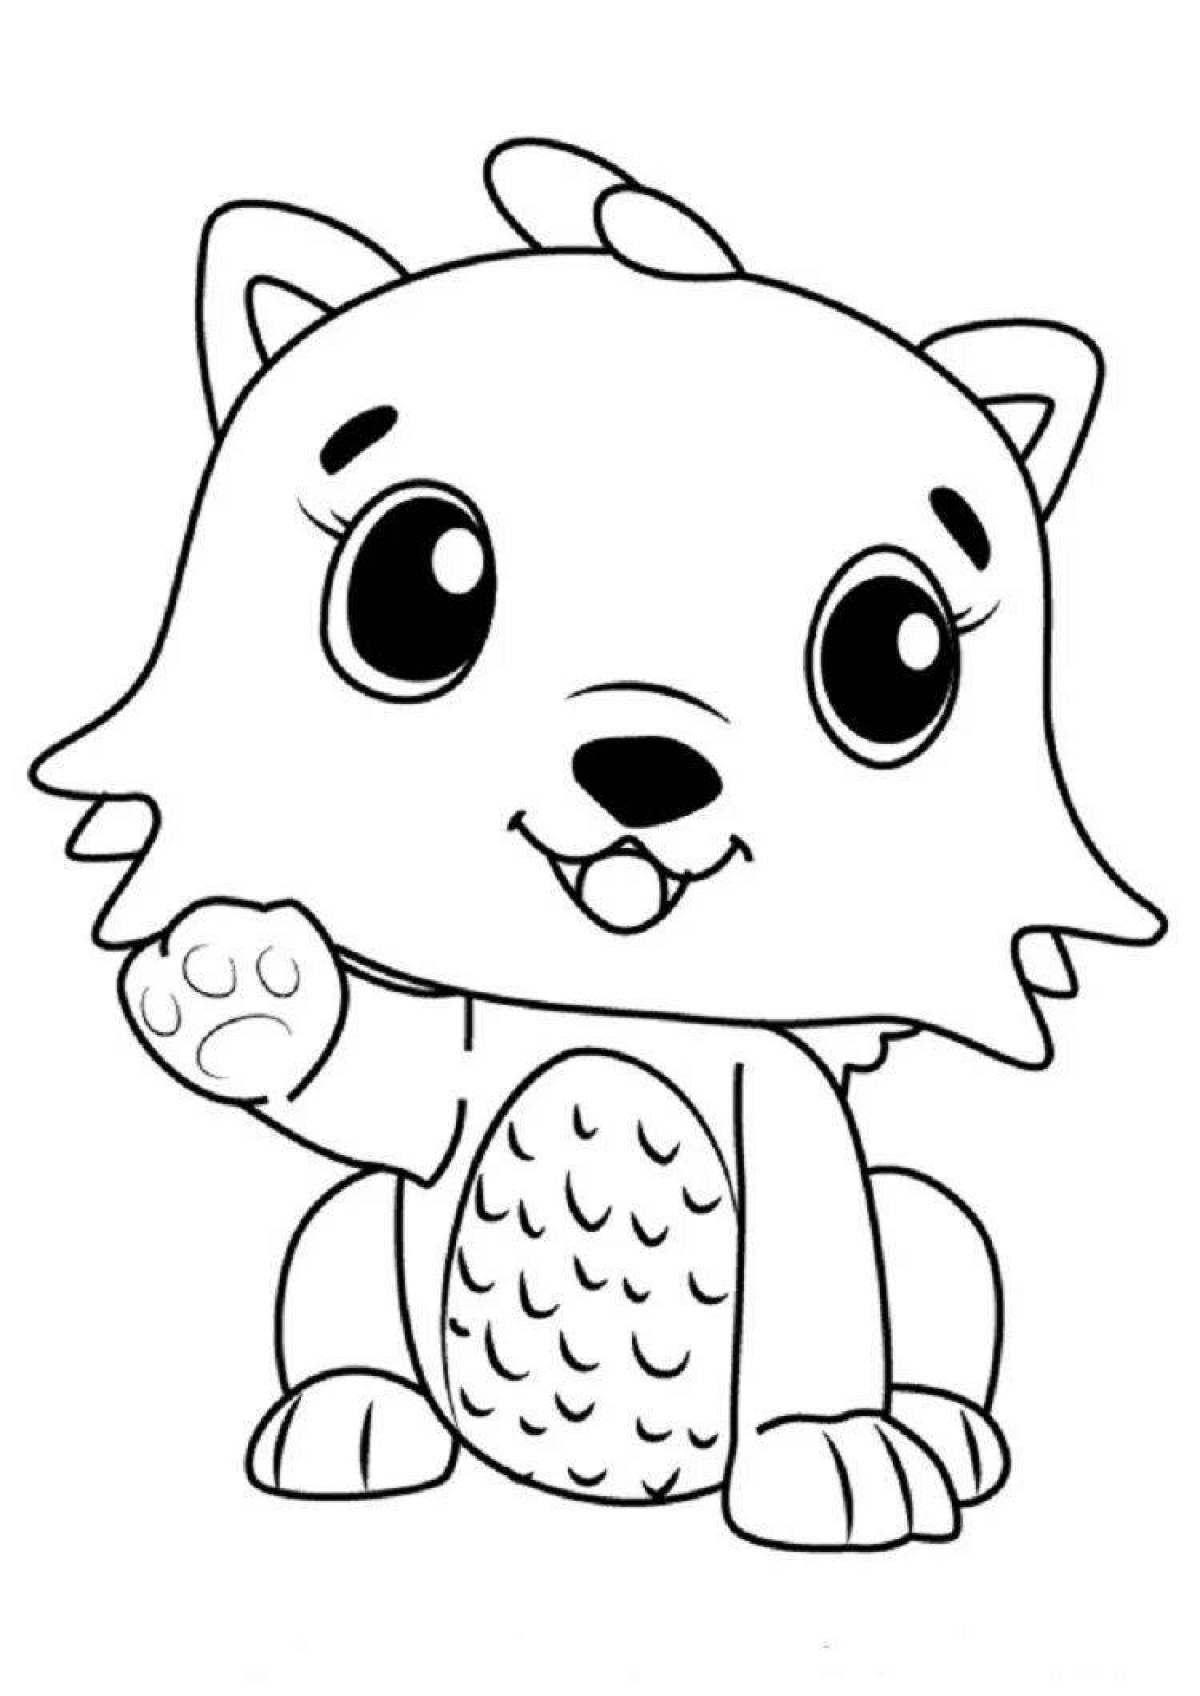 Adorable animal coloring book for kids